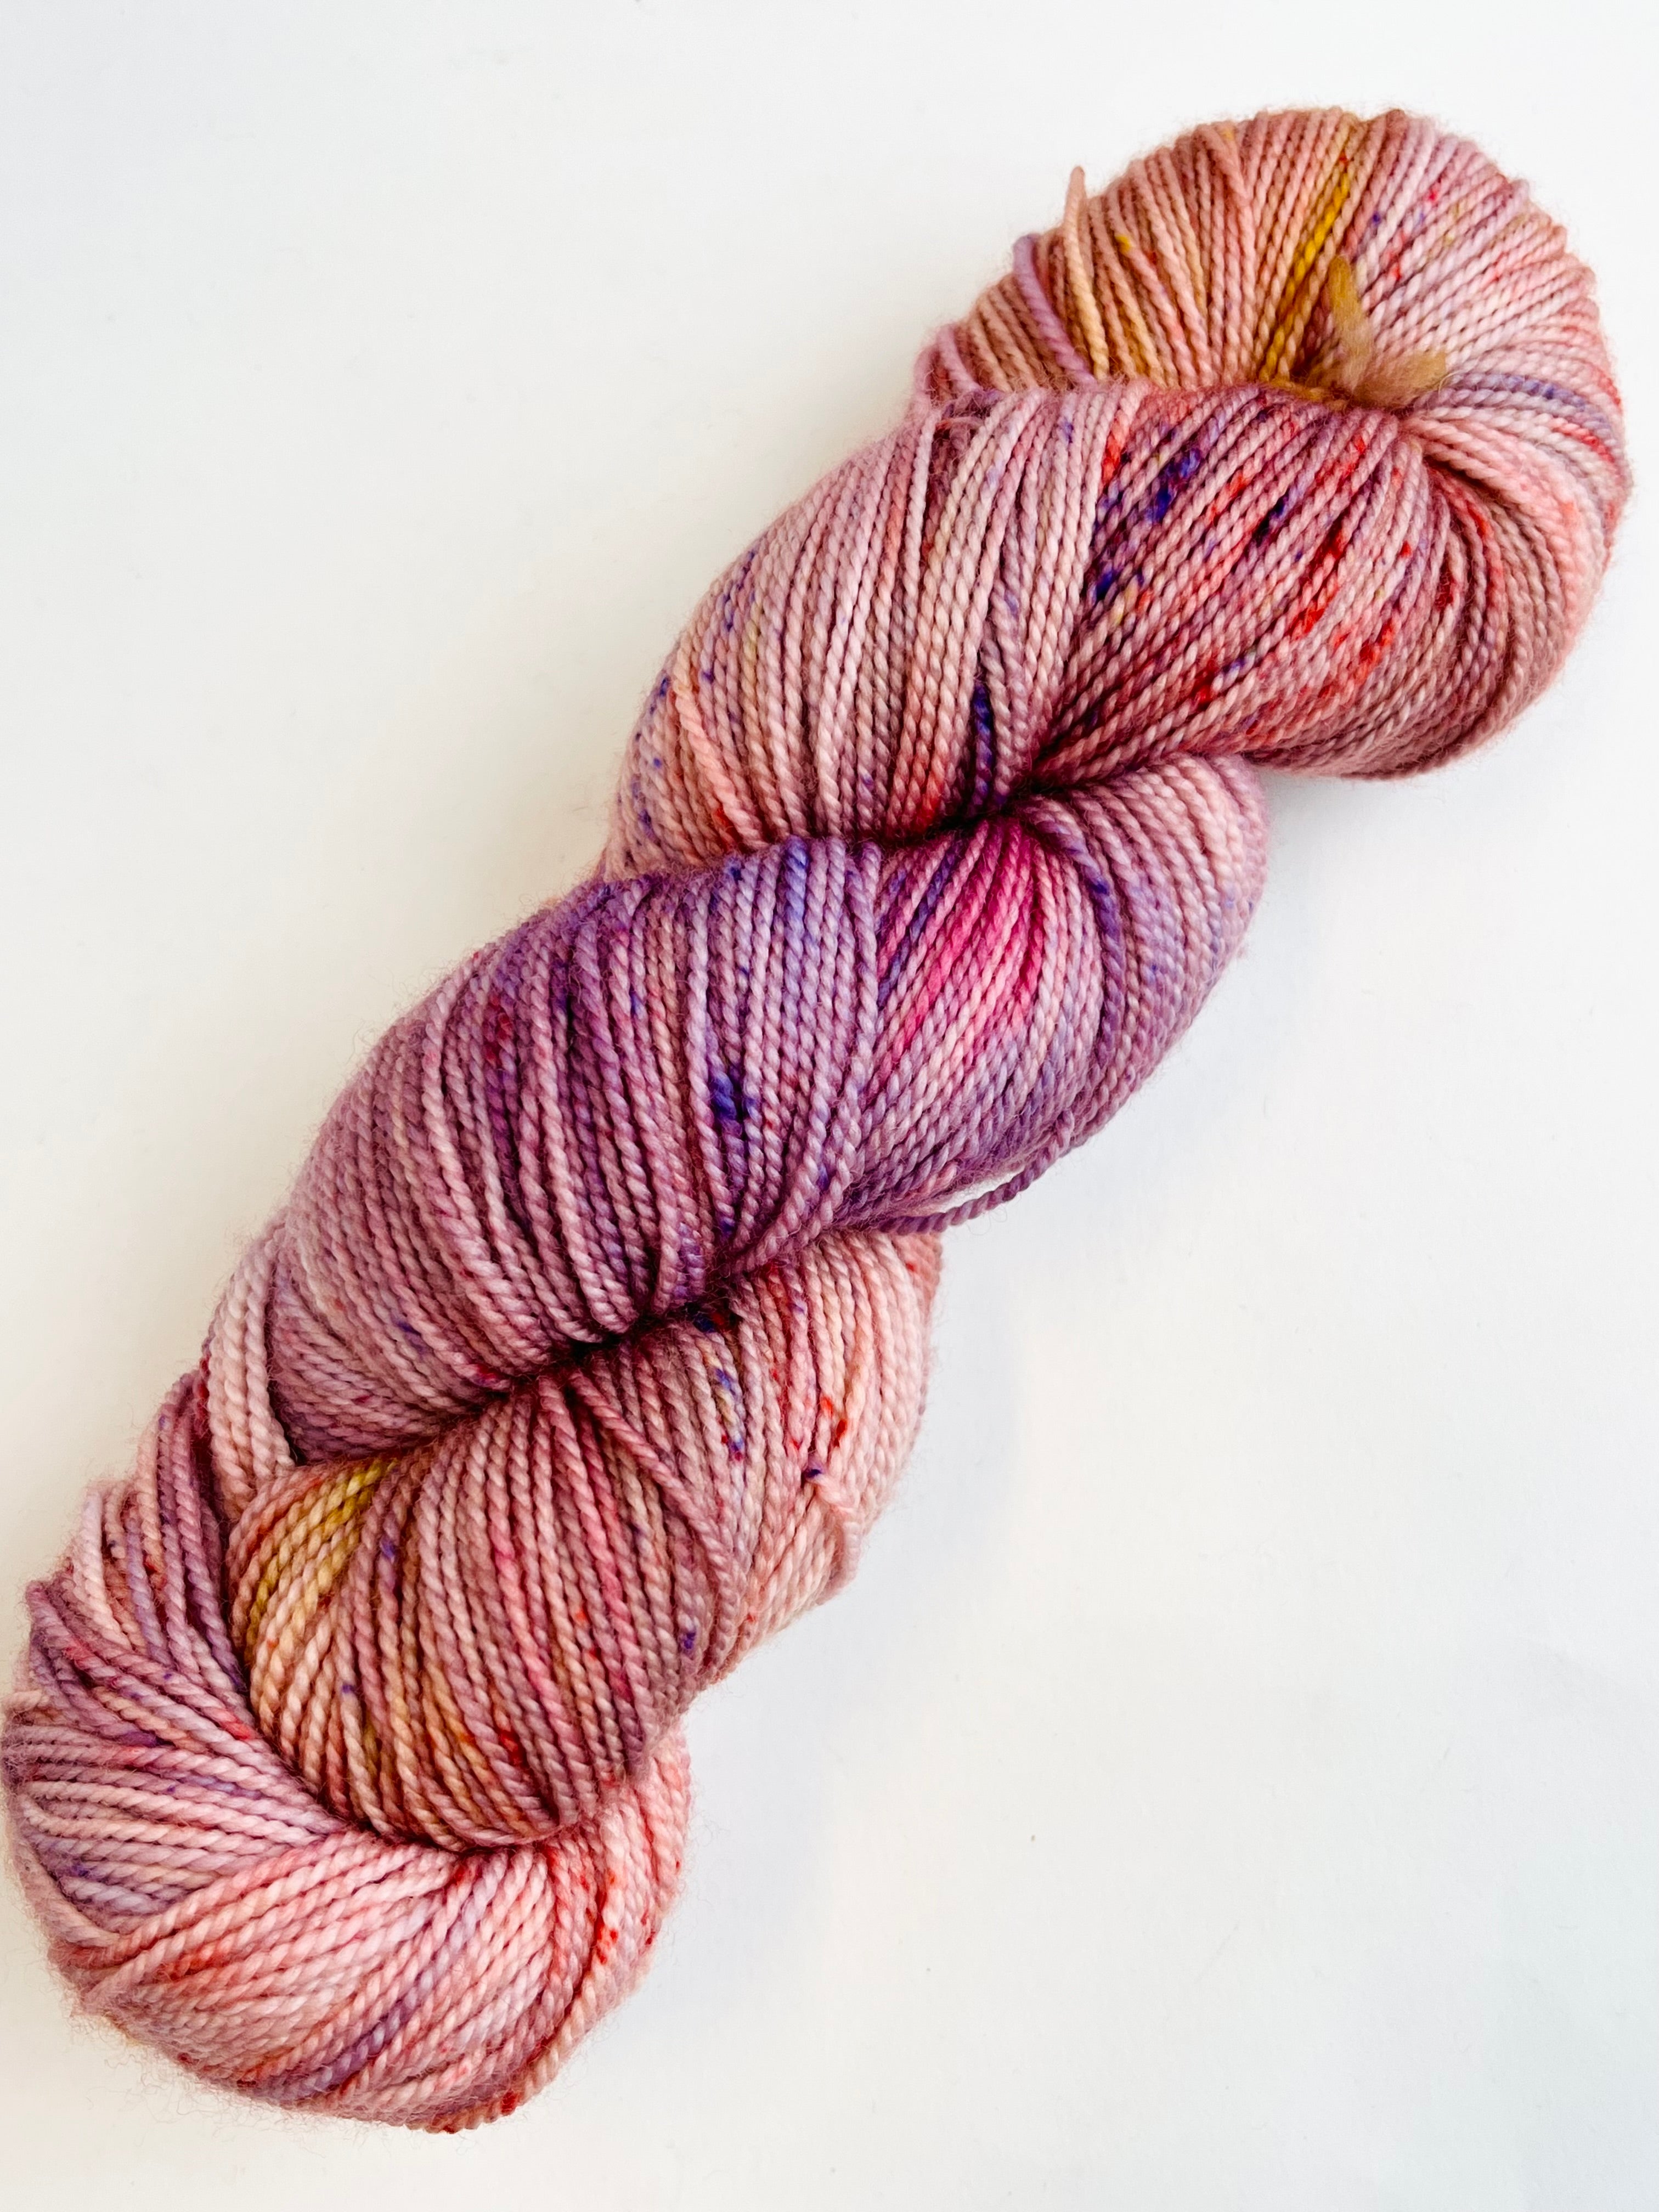 Pacific Sunset - Stream Sock 2.0 from Tributary Yarns